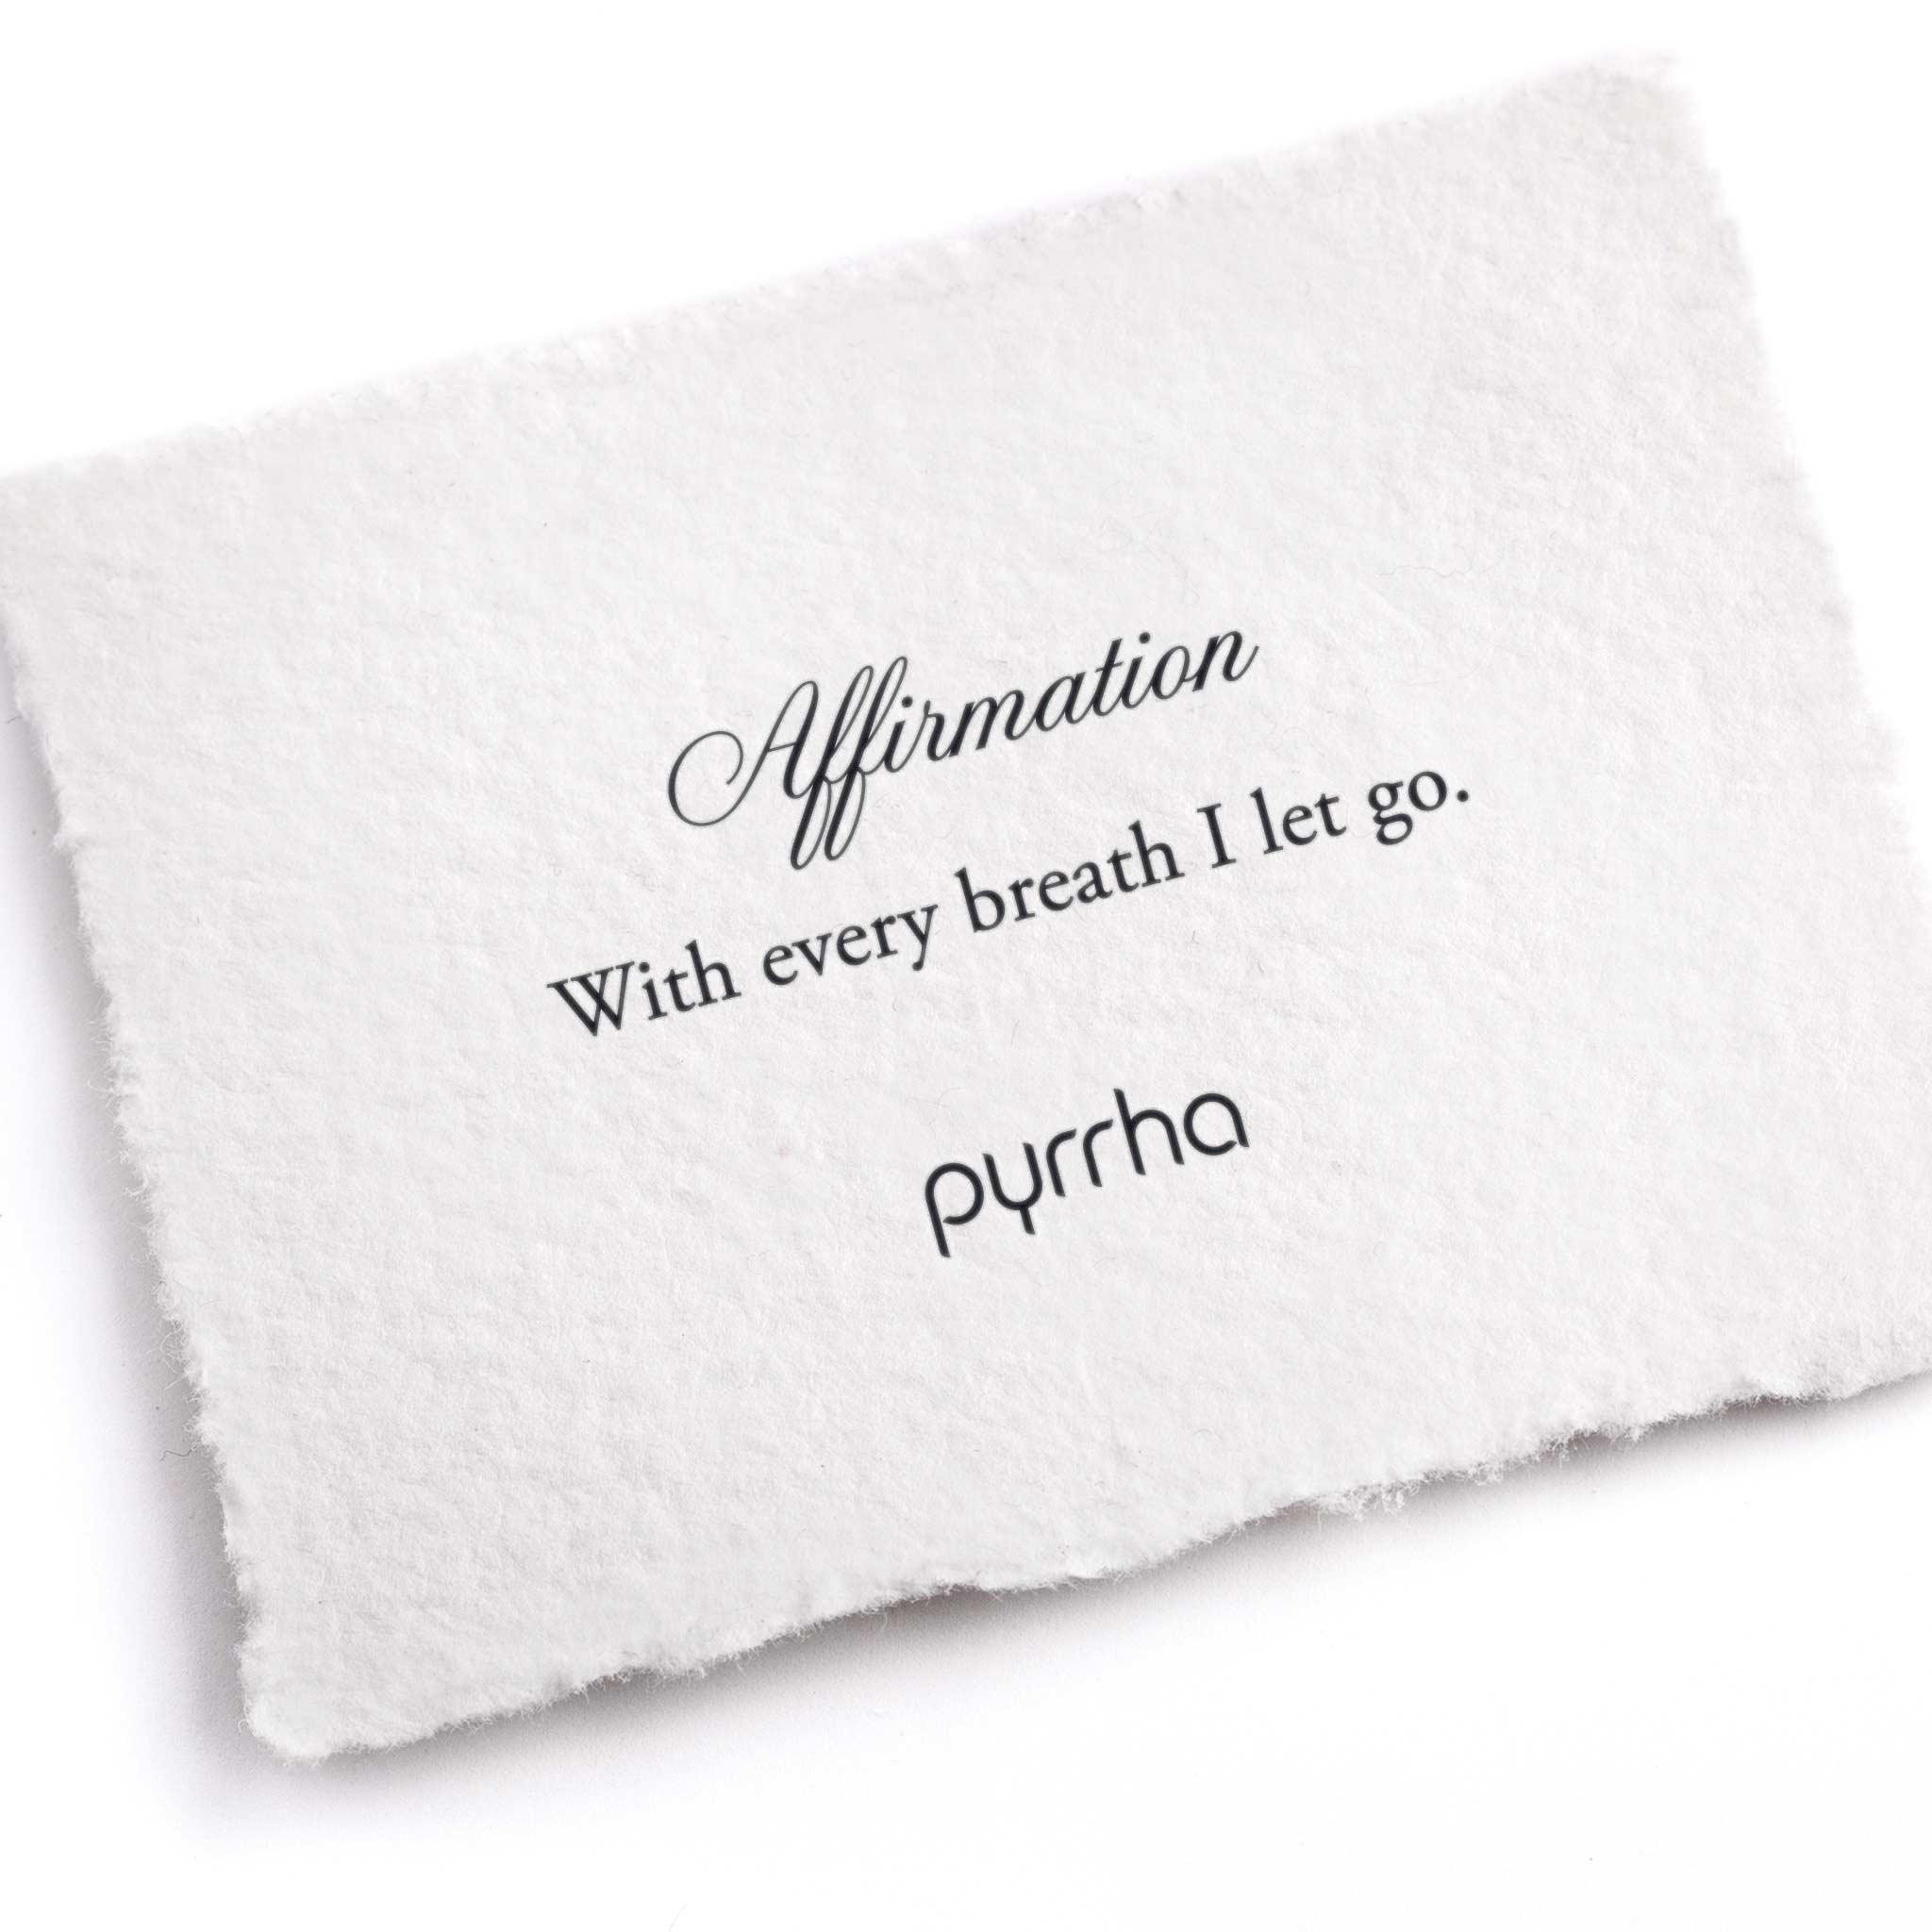 A hand-torn, letterpress printed card describing the meaning for Pyrrha's With Every Breath I Let Go Affirmation Talisman Necklace